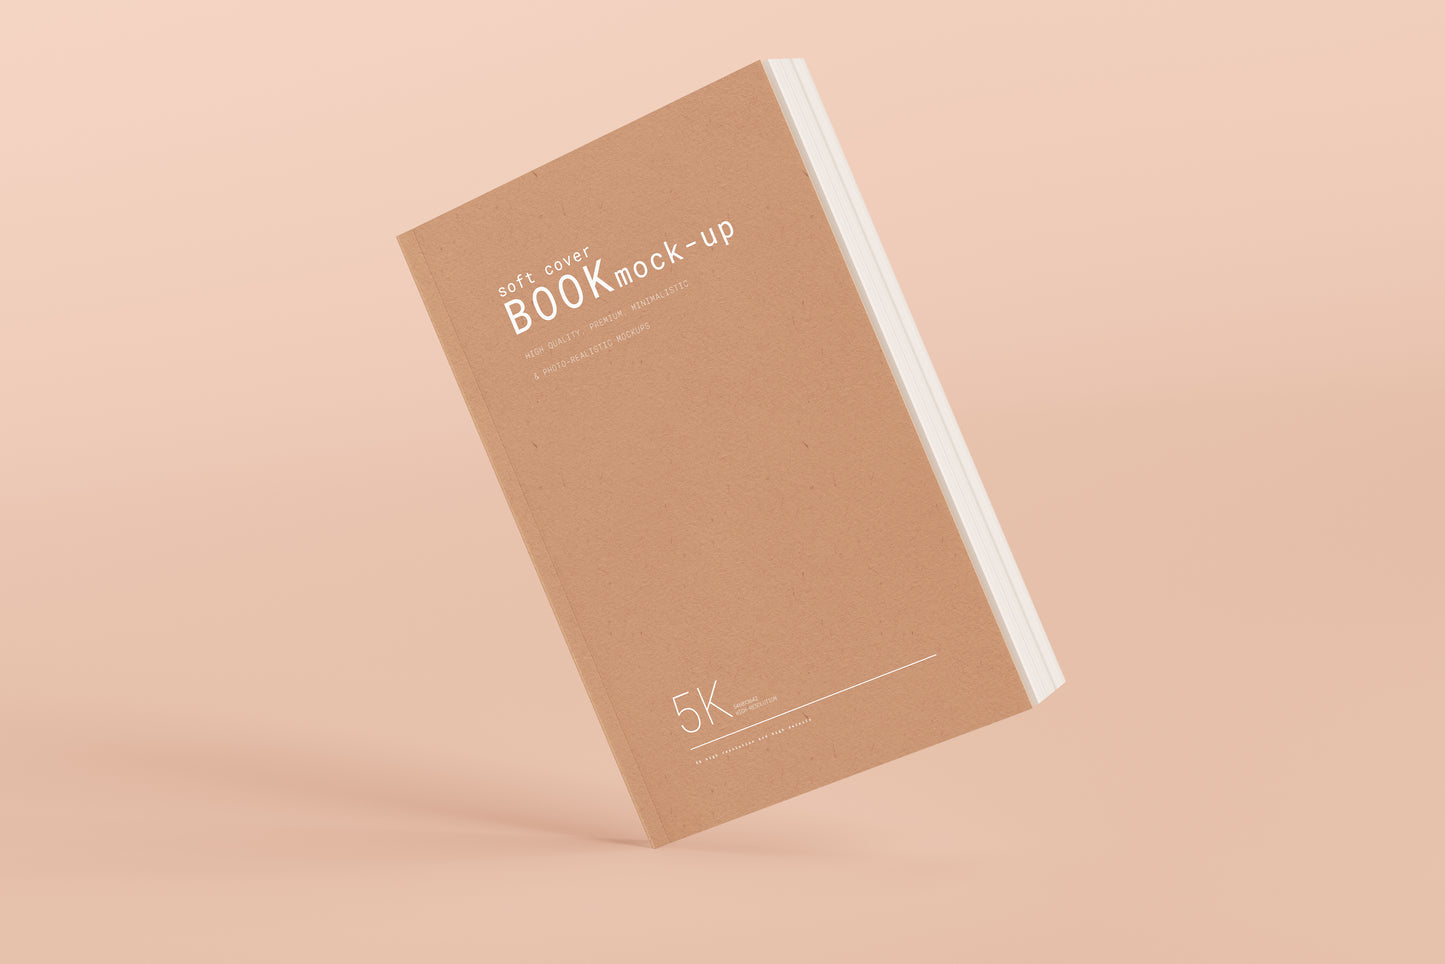 Soft Cover Book Mockups